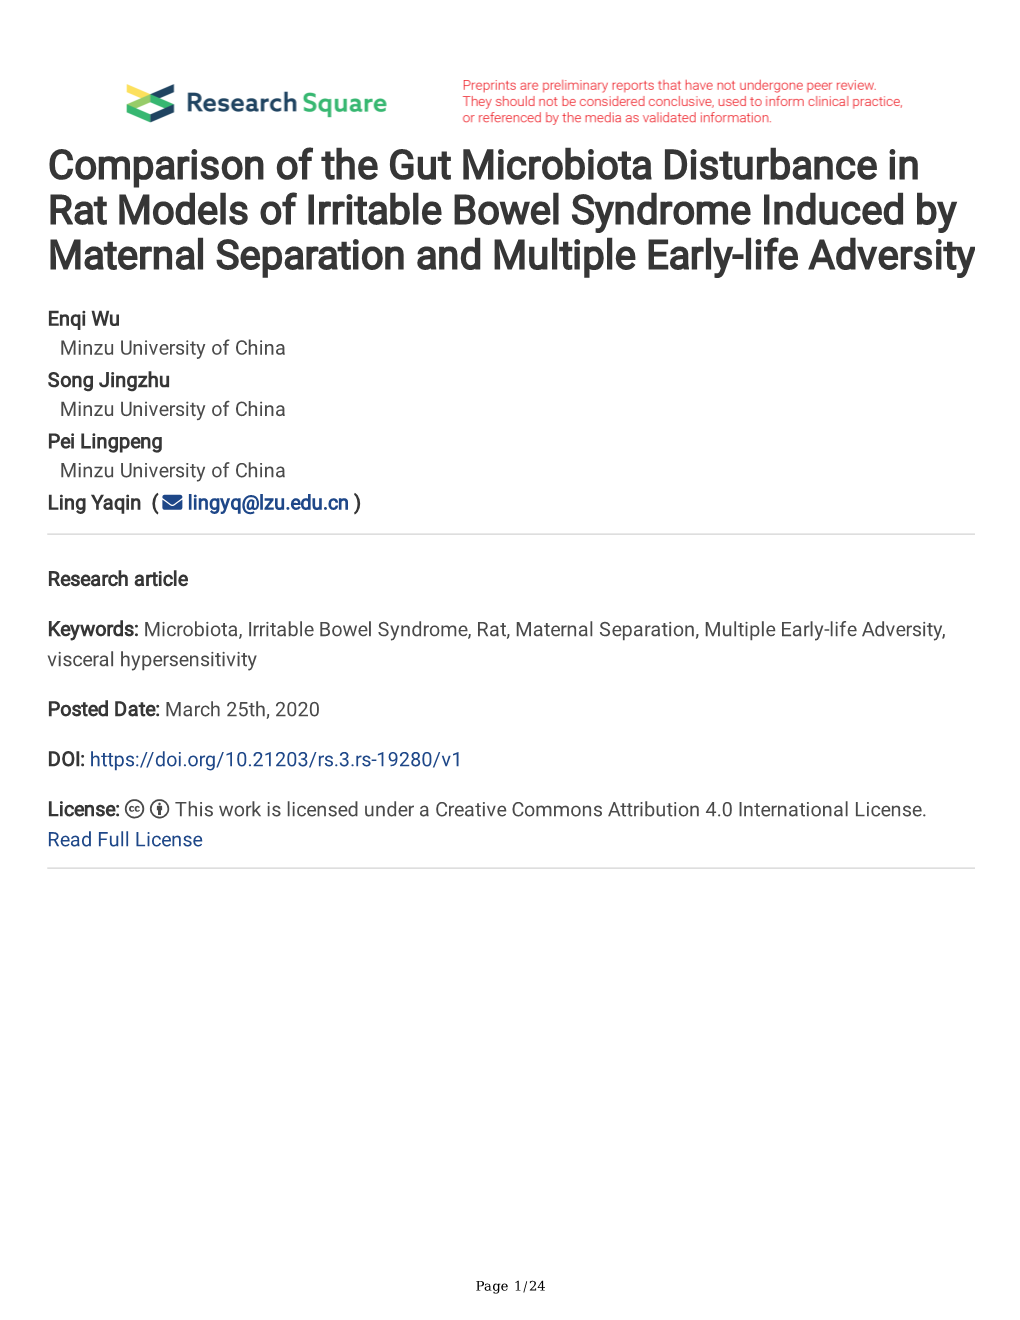 Comparison of the Gut Microbiota Disturbance in Rat Models of Irritable Bowel Syndrome Induced by Maternal Separation and Multiple Early-Life Adversity